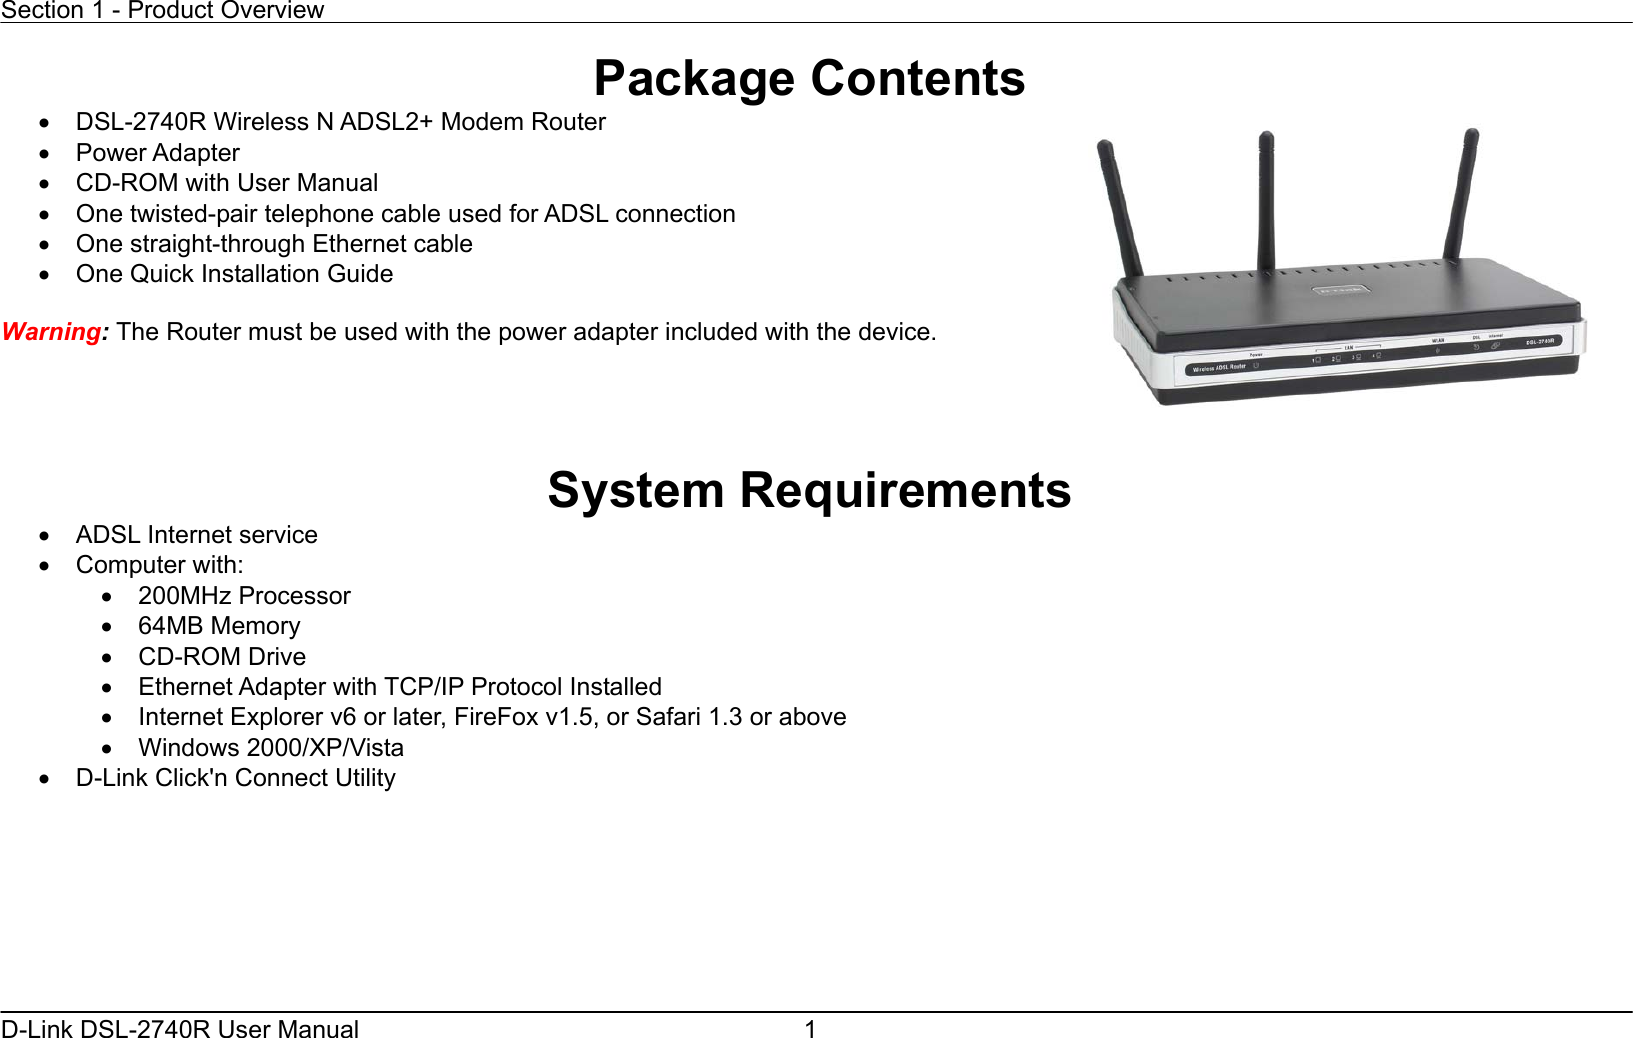 Section 1 - Product Overview  D-Link DSL-2740R User Manual  1Package Contents •  DSL-2740R Wireless N ADSL2+ Modem Router •  Power Adapter   •  CD-ROM with User Manual   •  One twisted-pair telephone cable used for ADSL connection   •  One straight-through Ethernet cable •  One Quick Installation Guide    Warning: The Router must be used with the power adapter included with the device.     System Requirements •  ADSL Internet service •  Computer with: •  200MHz Processor •  64MB Memory •  CD-ROM Drive •  Ethernet Adapter with TCP/IP Protocol Installed •  Internet Explorer v6 or later, FireFox v1.5, or Safari 1.3 or above •  Windows 2000/XP/Vista •  D-Link Click&apos;n Connect Utility  